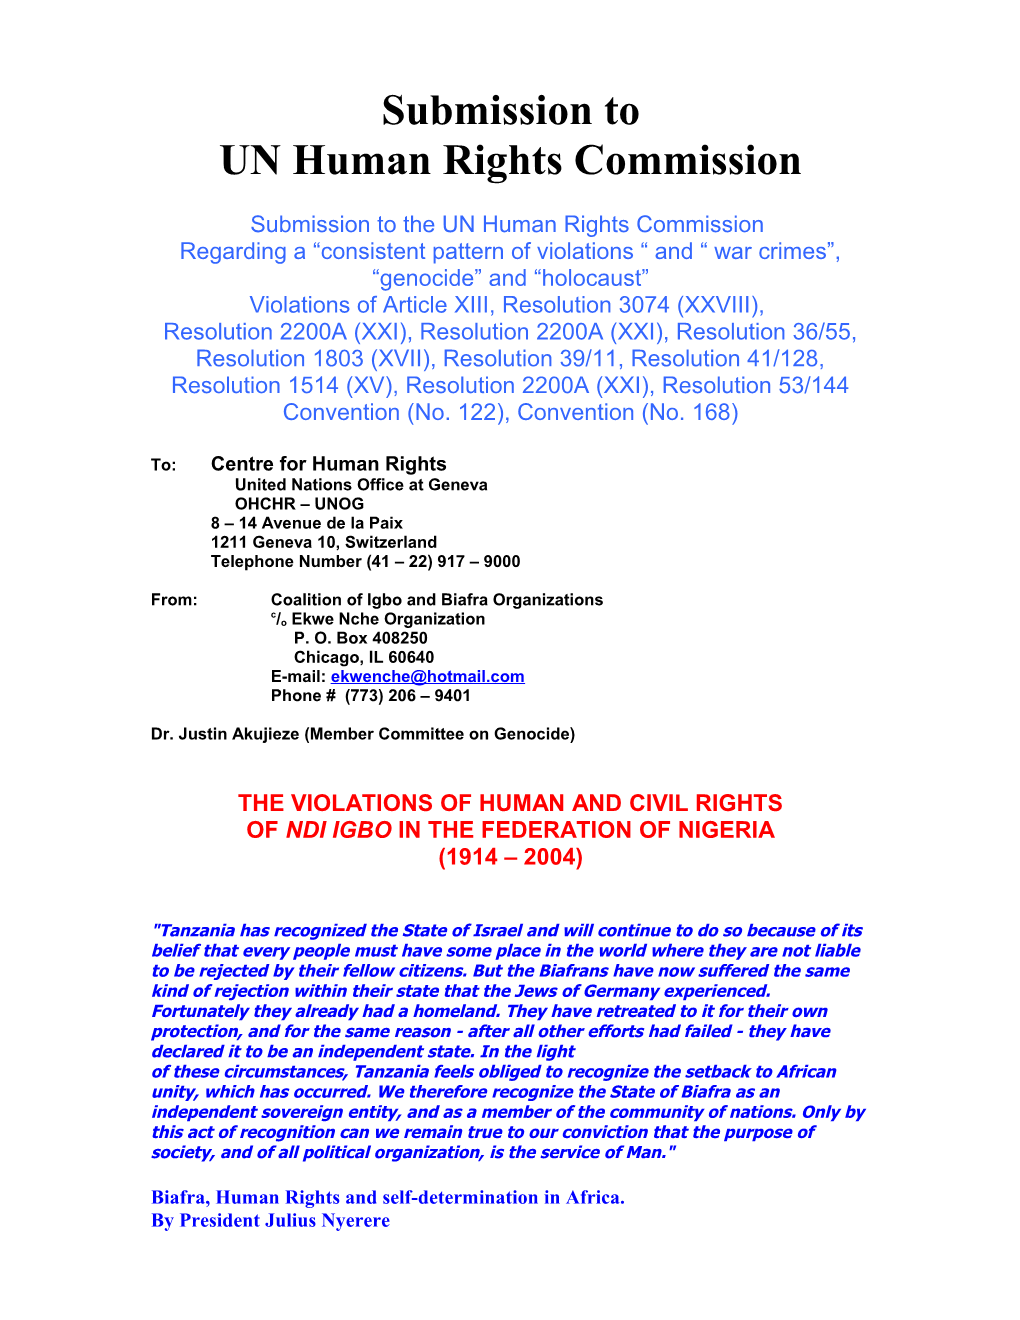 UN Human Rights Commission